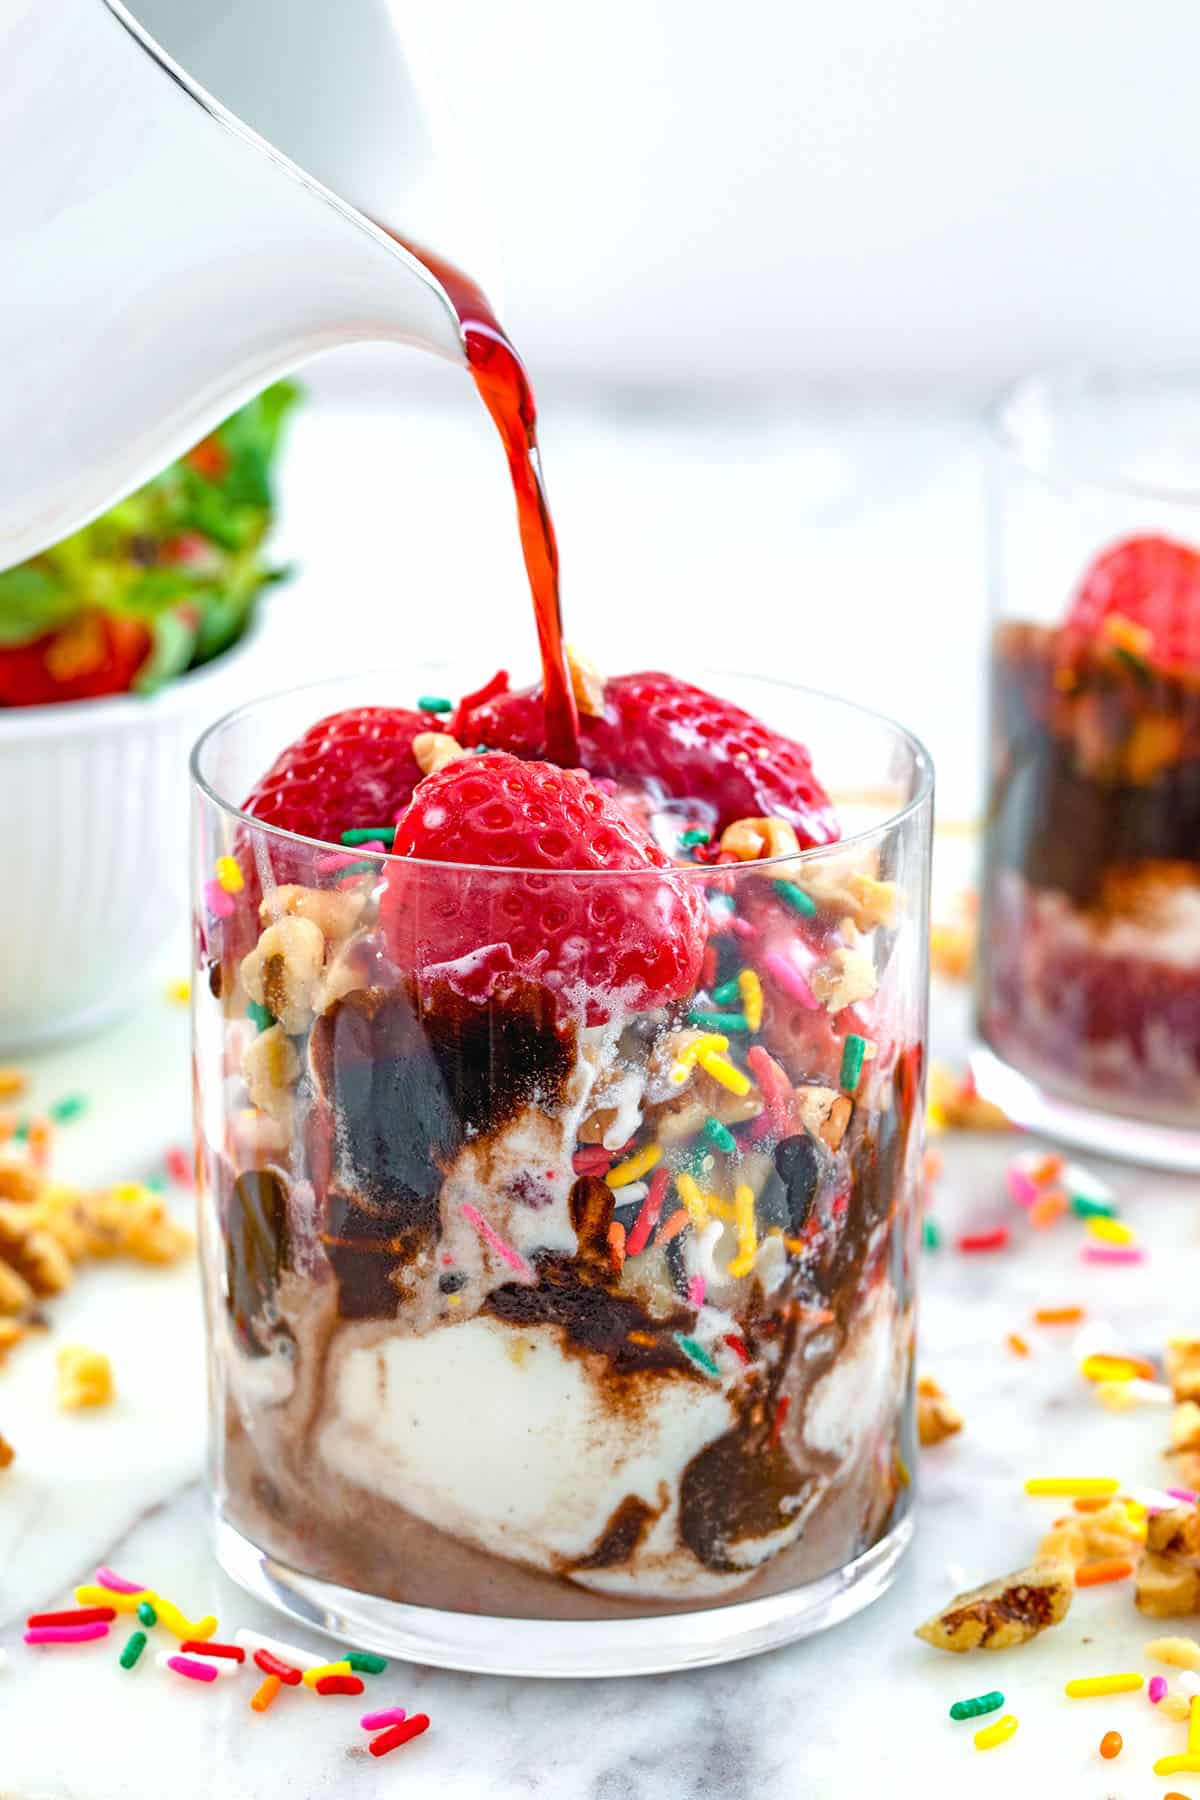 Head-on view of a glass of vanilla ice cream with chocolate, strawberries, walnuts, and sprinkles with red wine being poured over it.